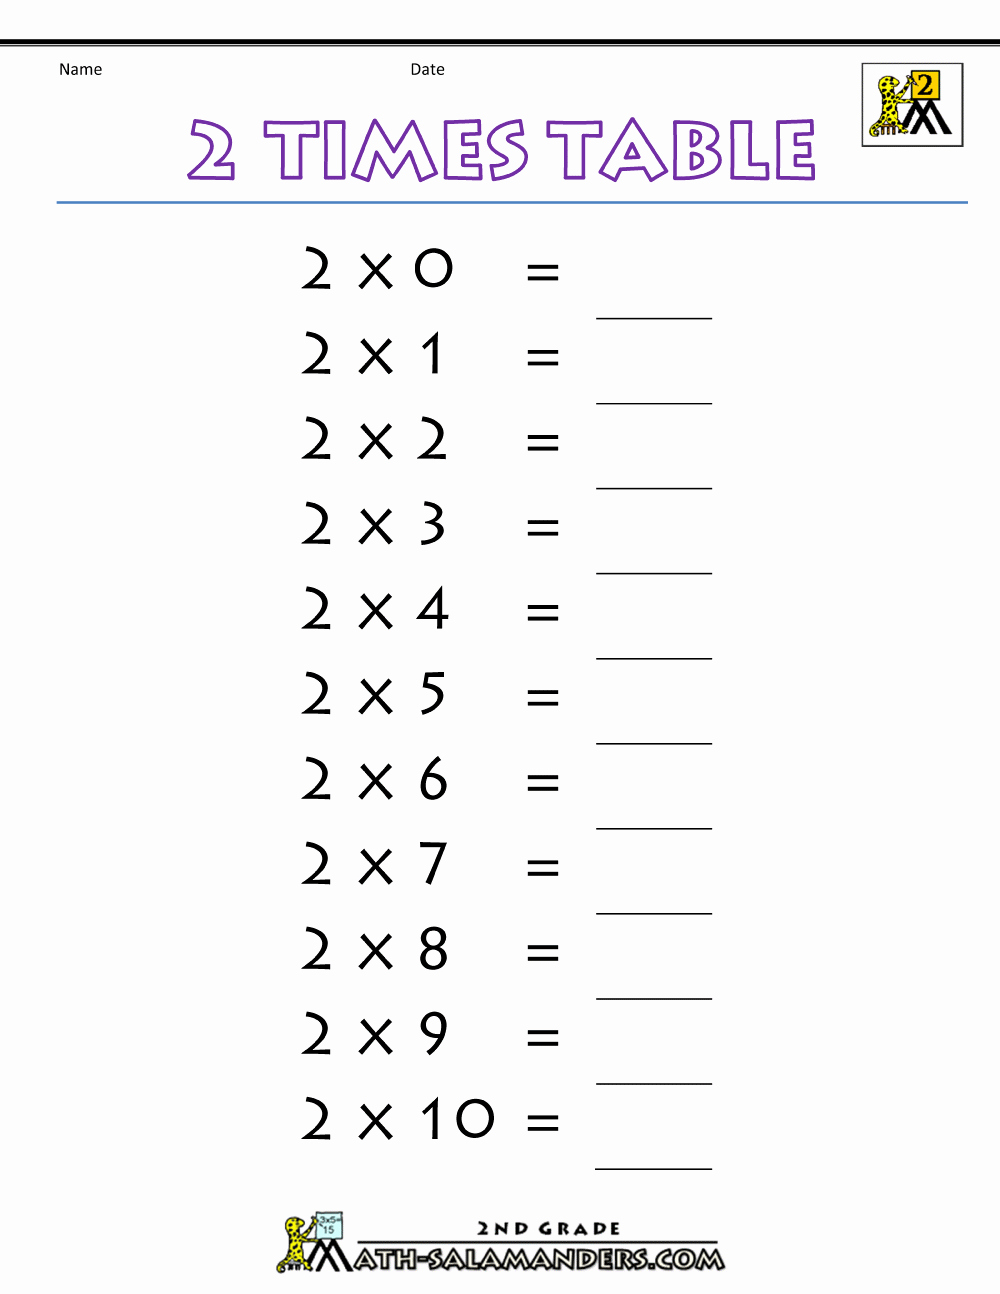 2 Times Table Worksheet Beautiful 2 Times Table